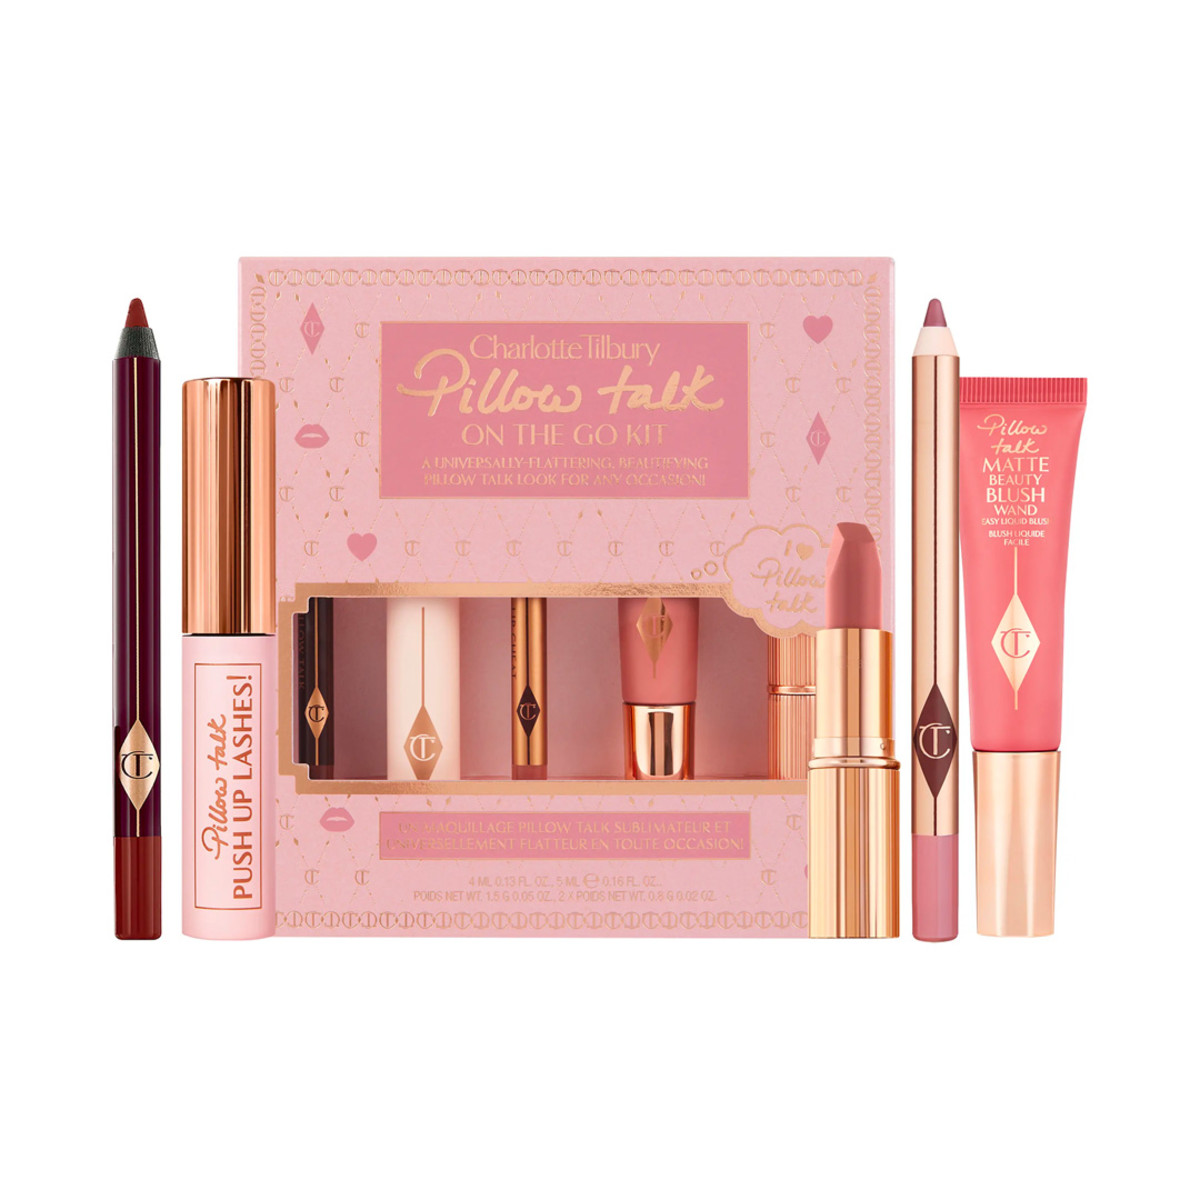 One of the best makeup gift sets for women who love all things beauty, the Charlotte Tilbury Pillow Talk On the Go Kit available now at Sephora